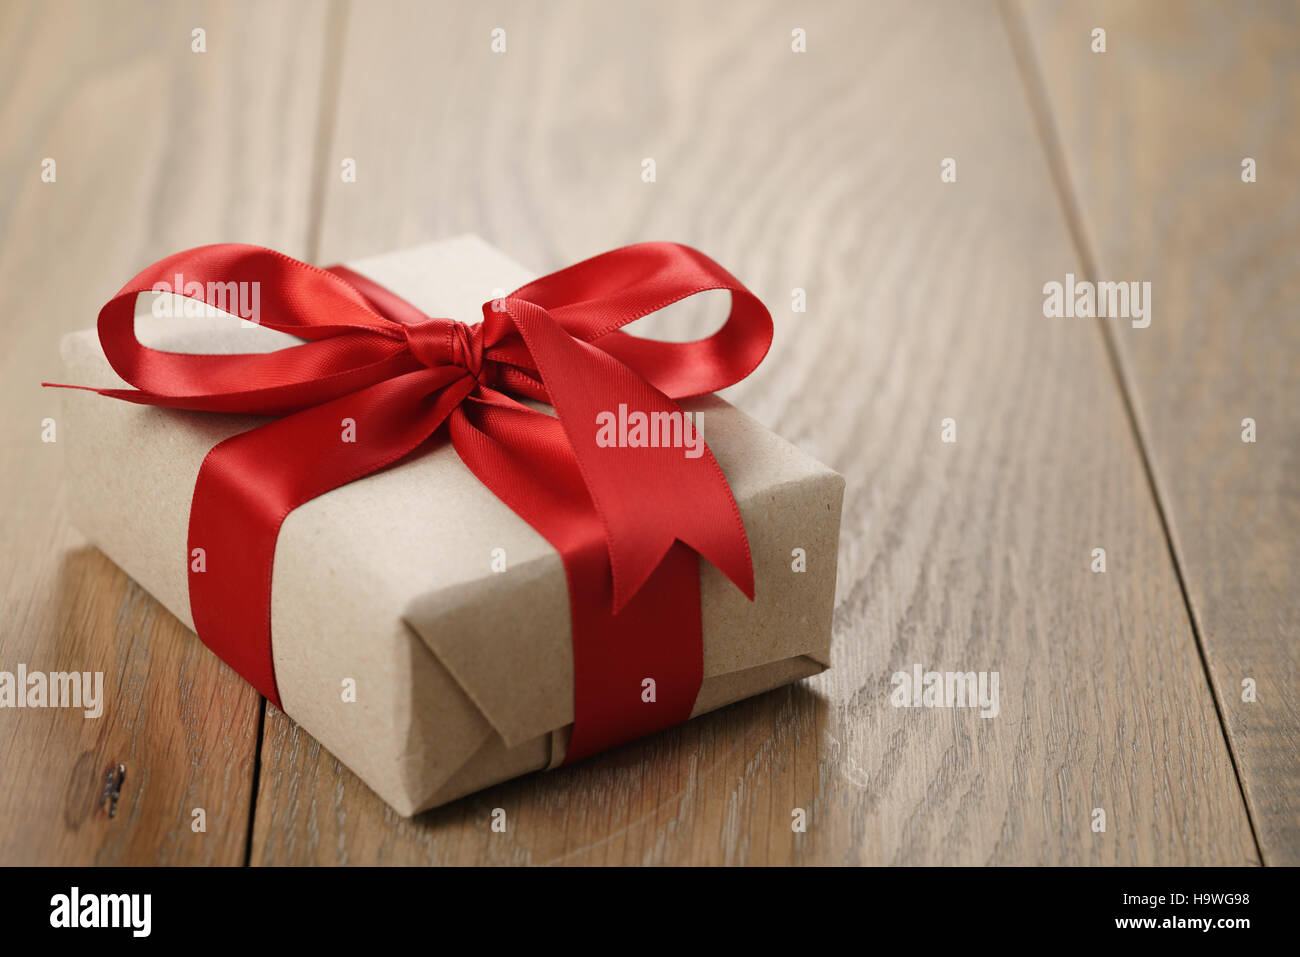 rustic craft paper gift box with red ribbon bow on wood table Stock Photo